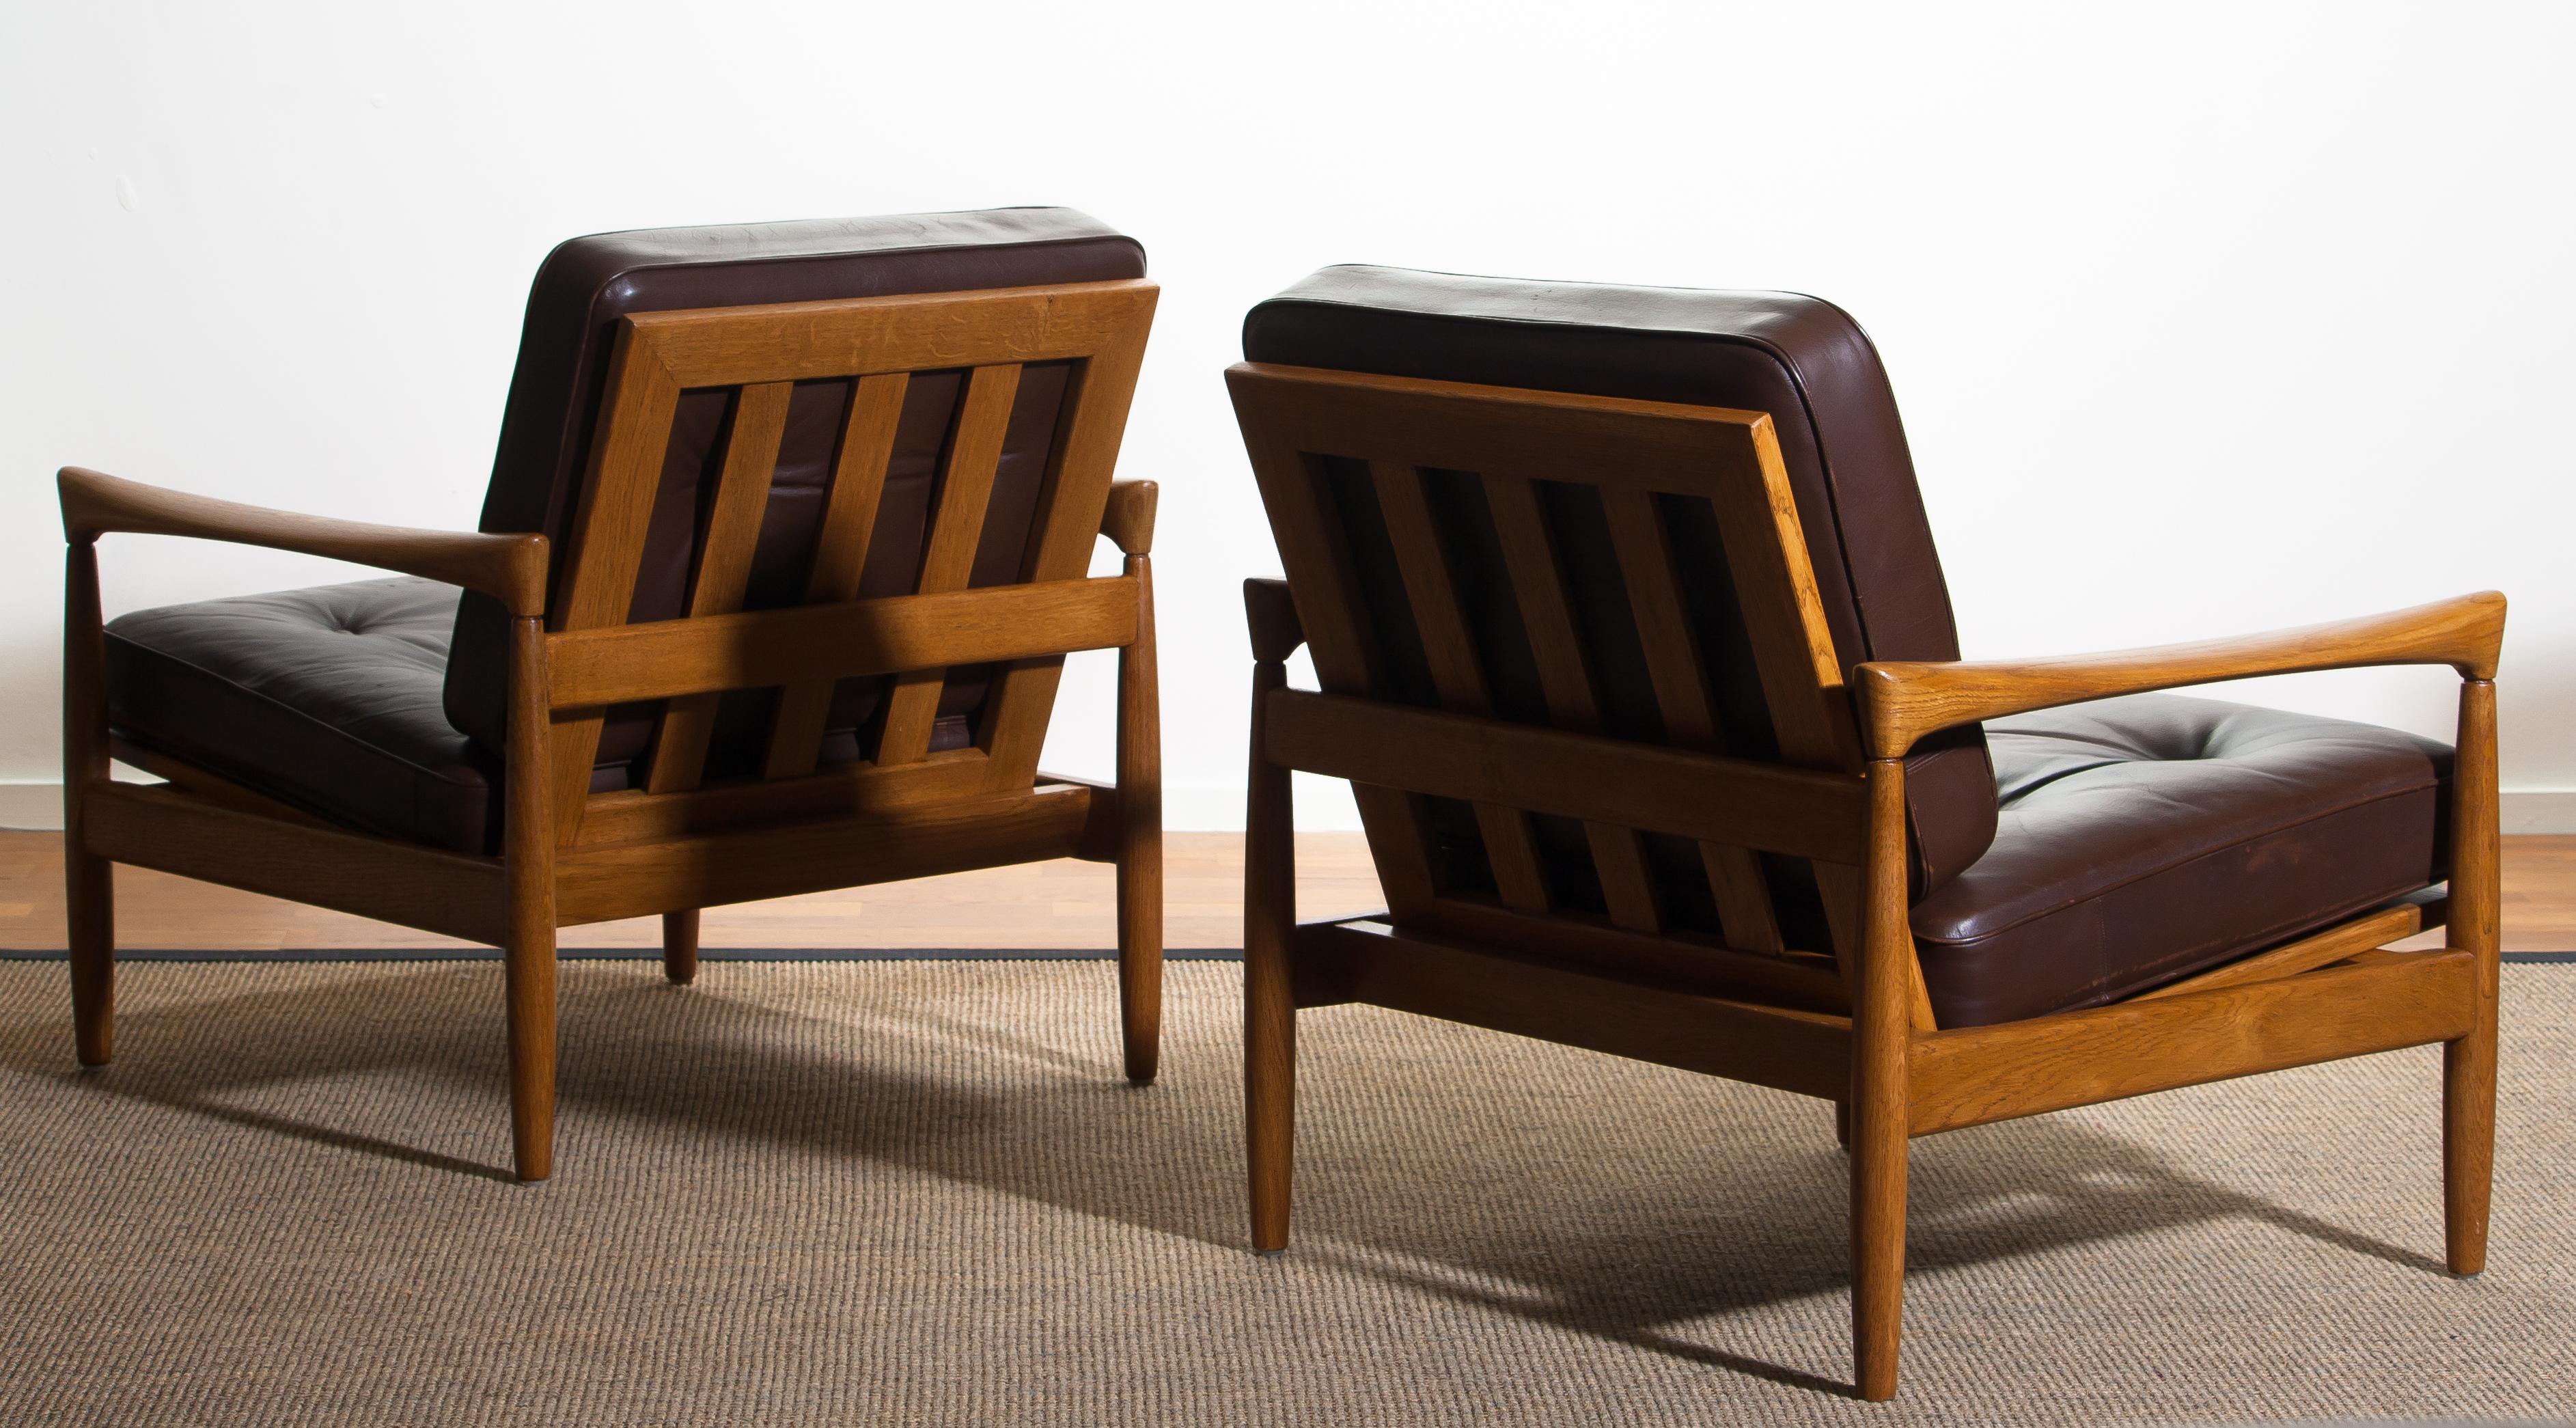 1960s, Set of Two Oak and Brown Leather Easy or Lounge Chairs by Erik Wörtz (Leder)